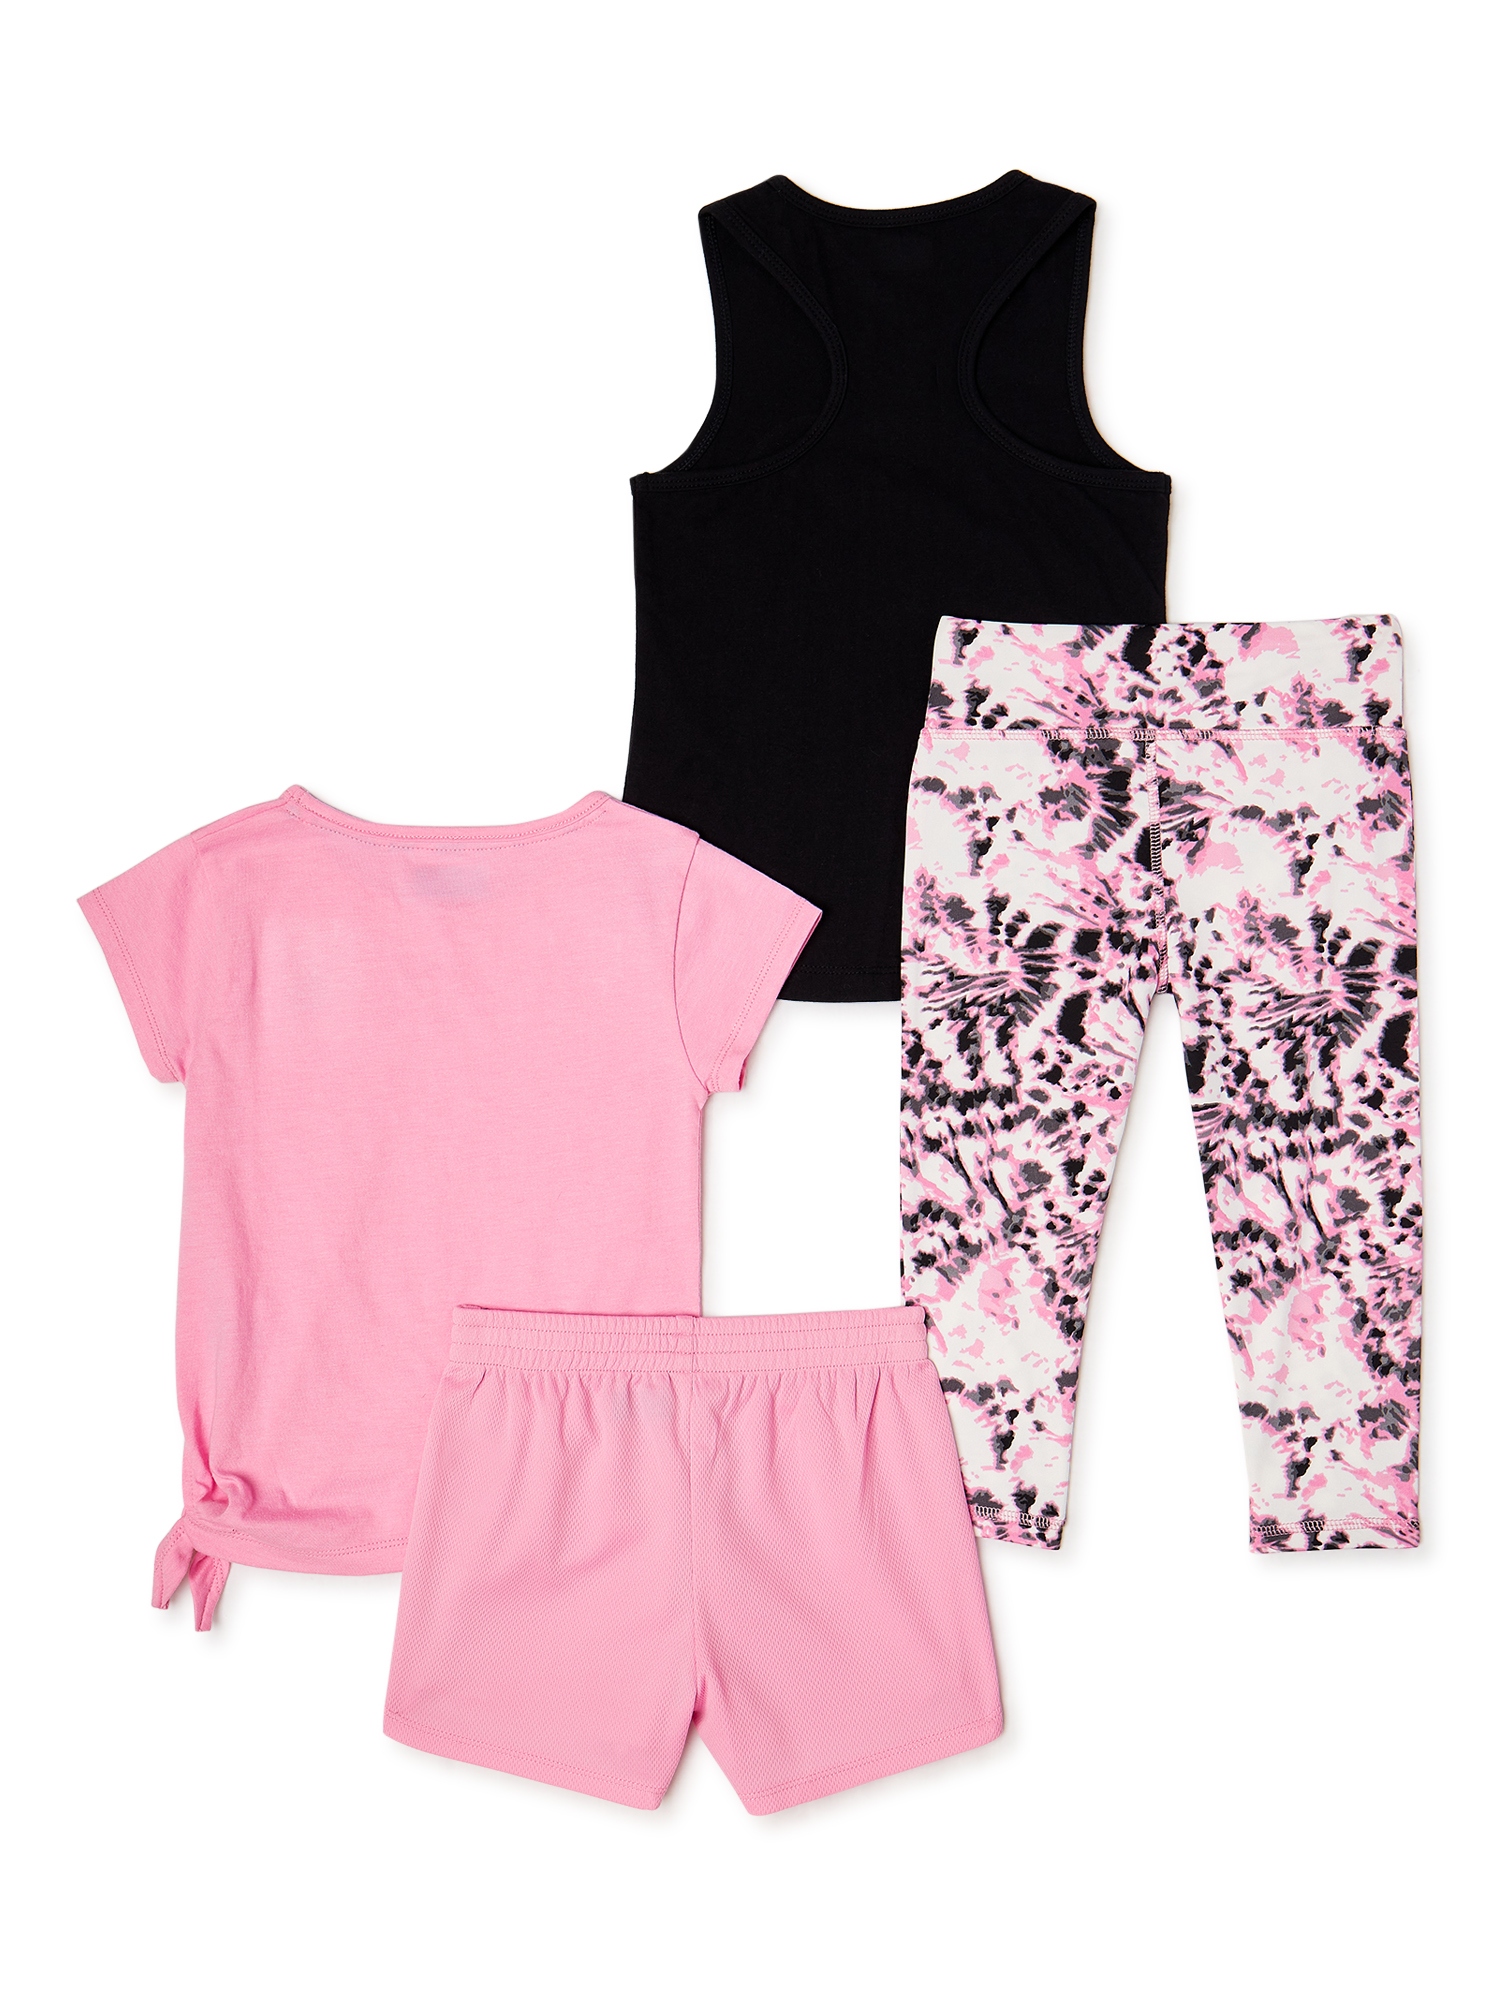 RBX Girls Graphic Tank Top, Performance T-Shirt with Side Tie, Printed Leggings and Running Shorts, 4-Piece Active Set, Sizes 4-16 - image 2 of 3